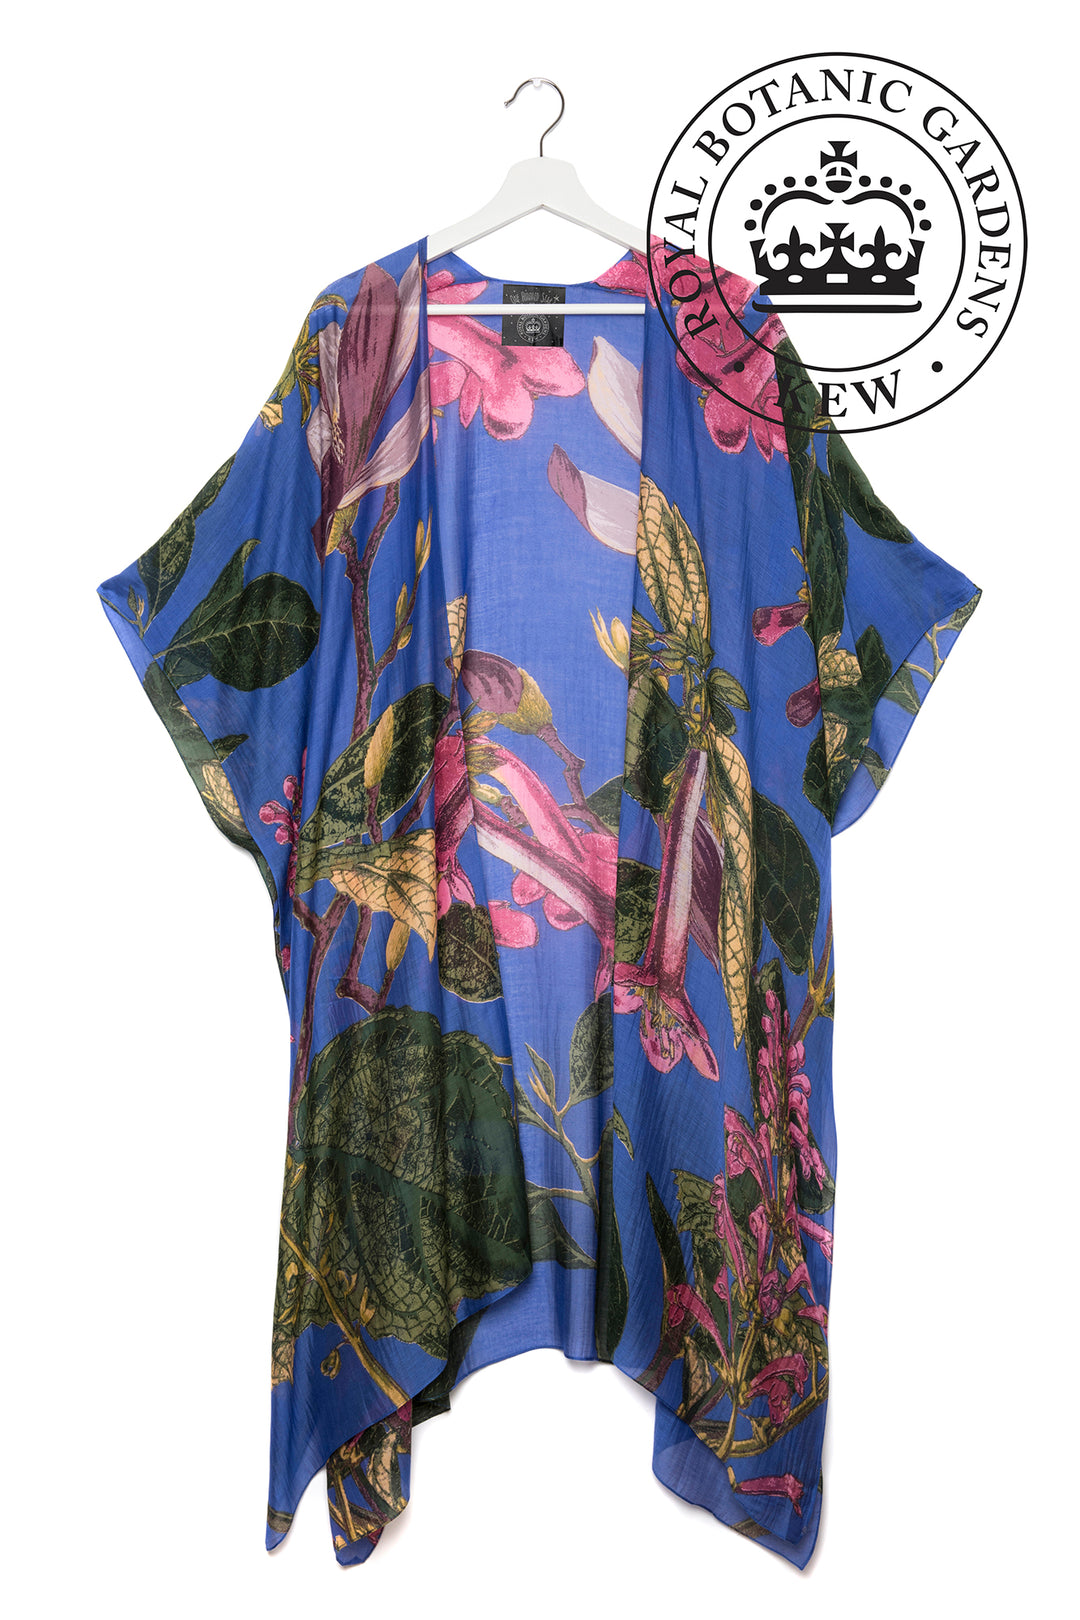 KEW Magnolia Purple Throwover- These lightweight throwovers make the perfect cover up, they are mid-length with an open front and loose arms, perfect for the warmer months or worn on holiday as the ideal resort wear. 